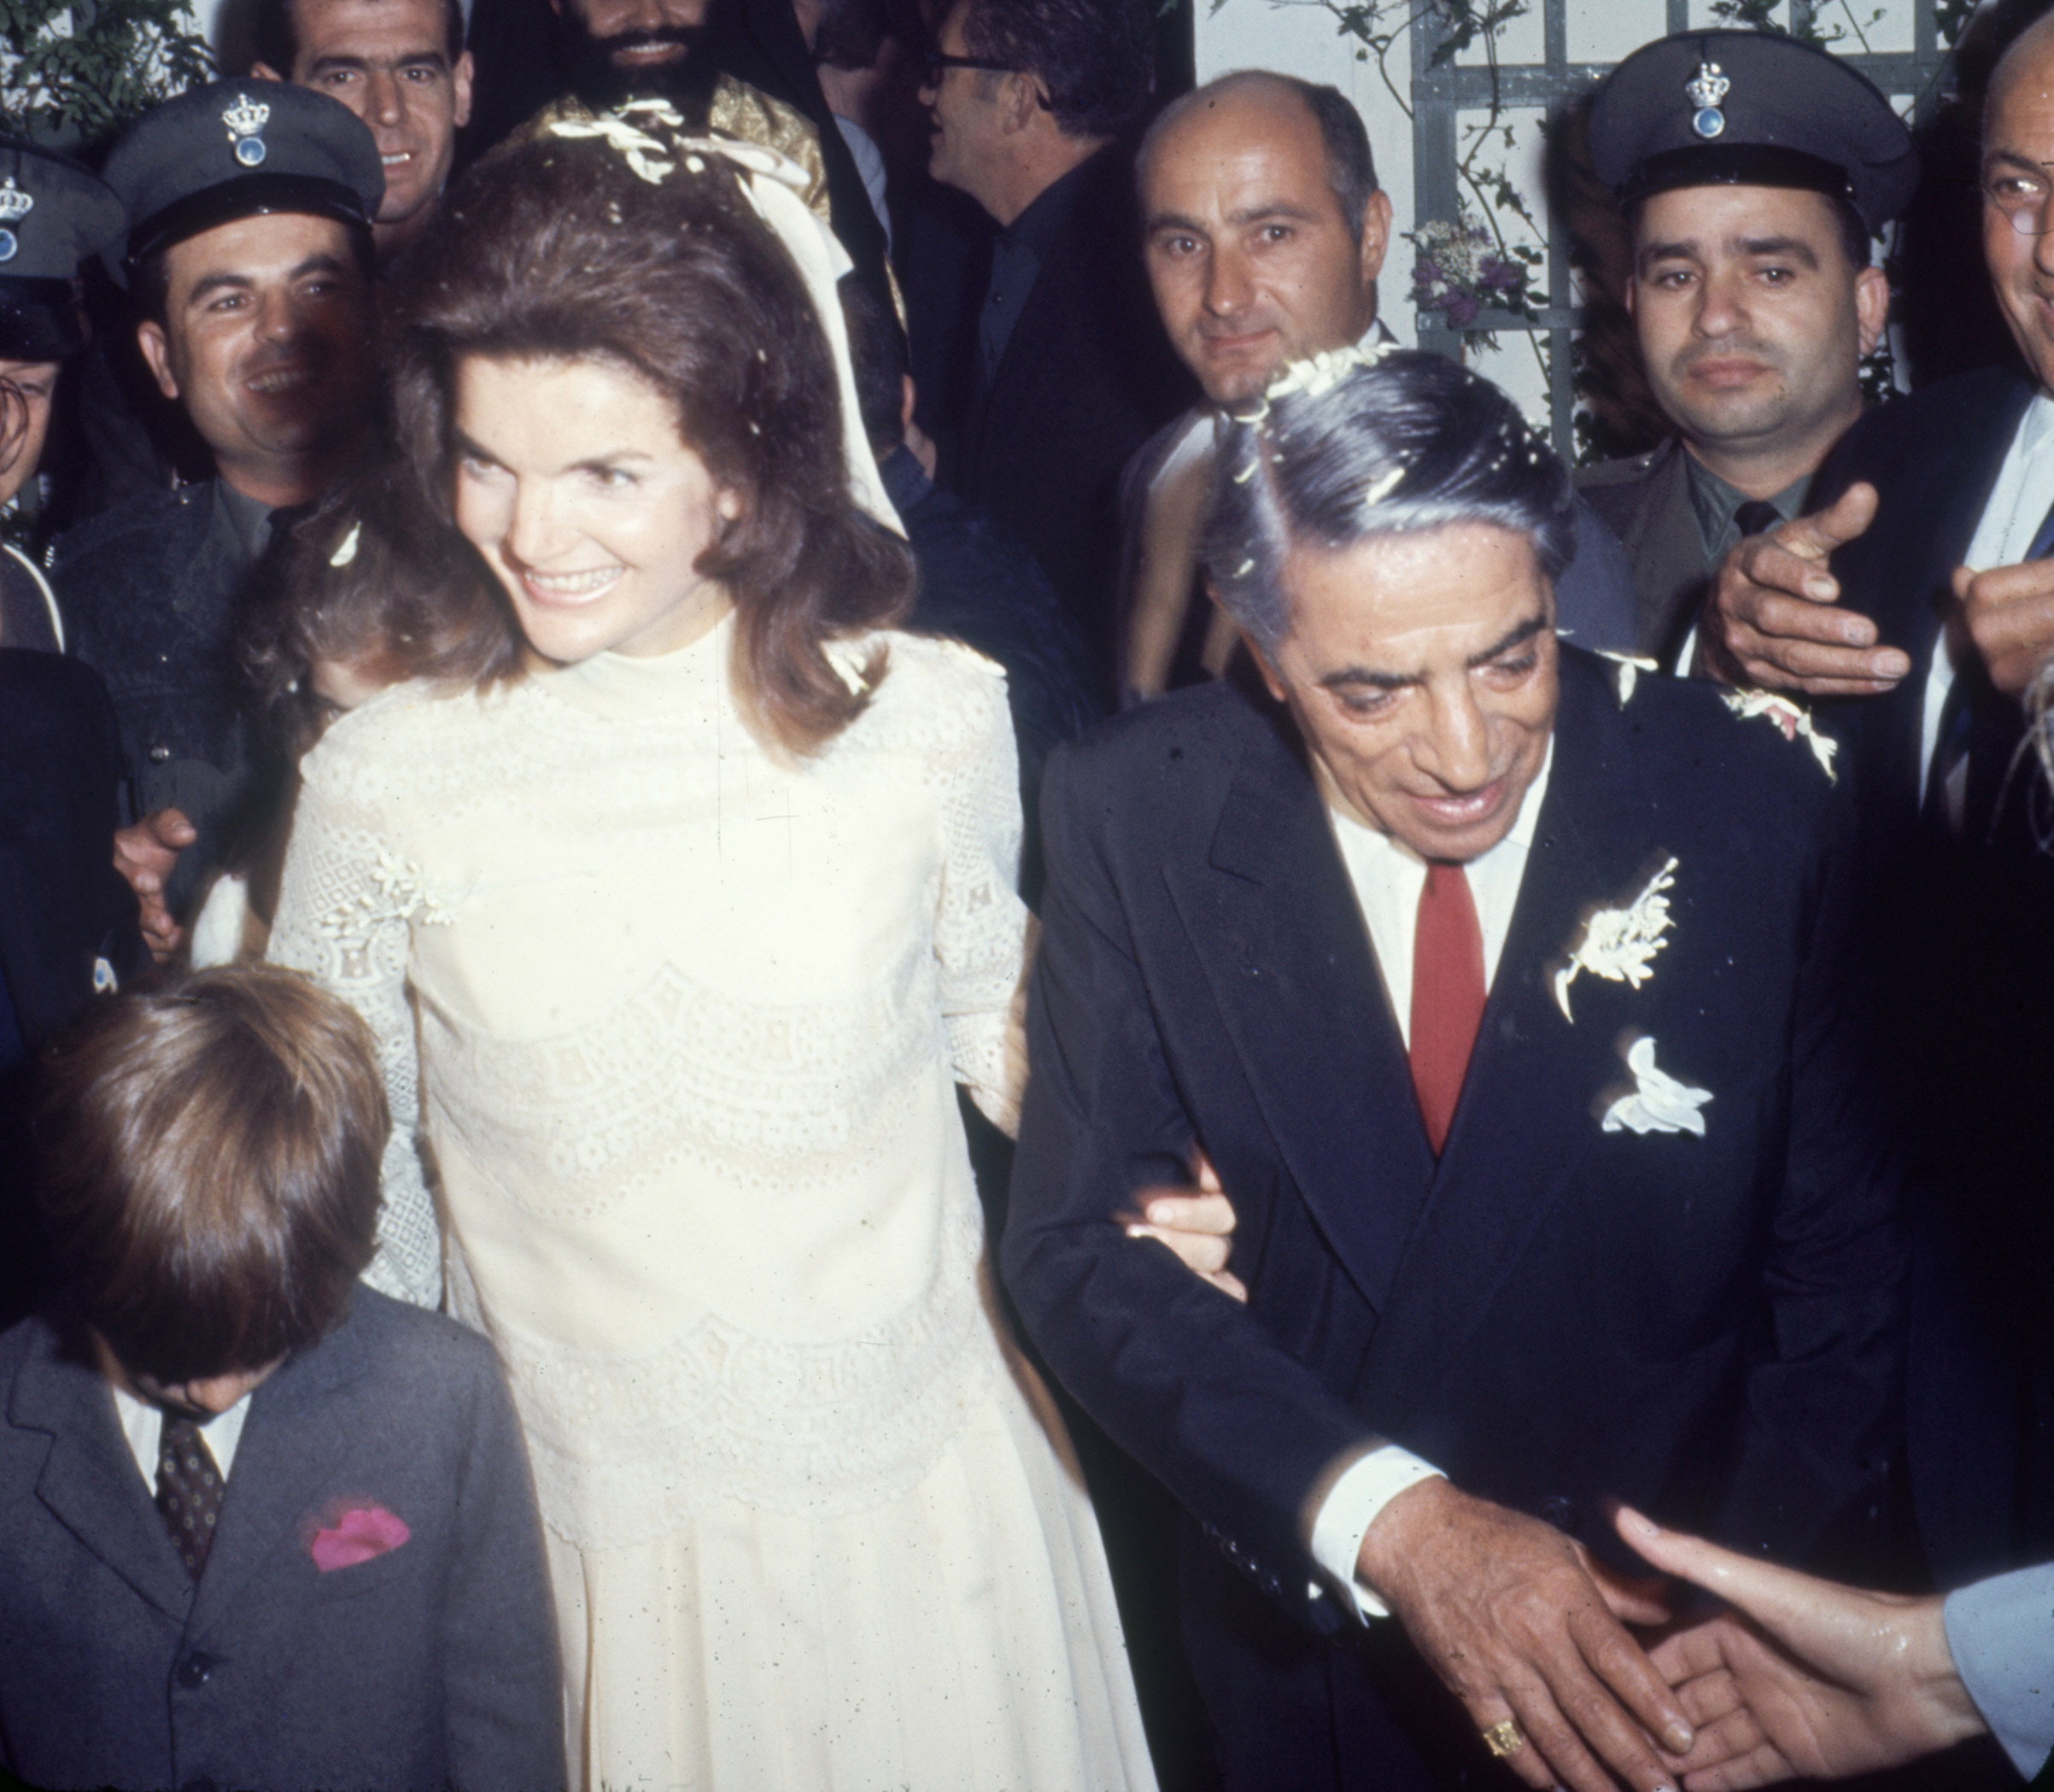 after their wedding in Scorpios, Greece on Oct. 20, 1968. Kennedy's son, John Kennedy Jr. is at left, fore. (Bill Ray/Time &amp; Life Pictures—Getty Images Jackie Lee Bouvier Kennedy Onassis and husband Aristotle Onassis right)